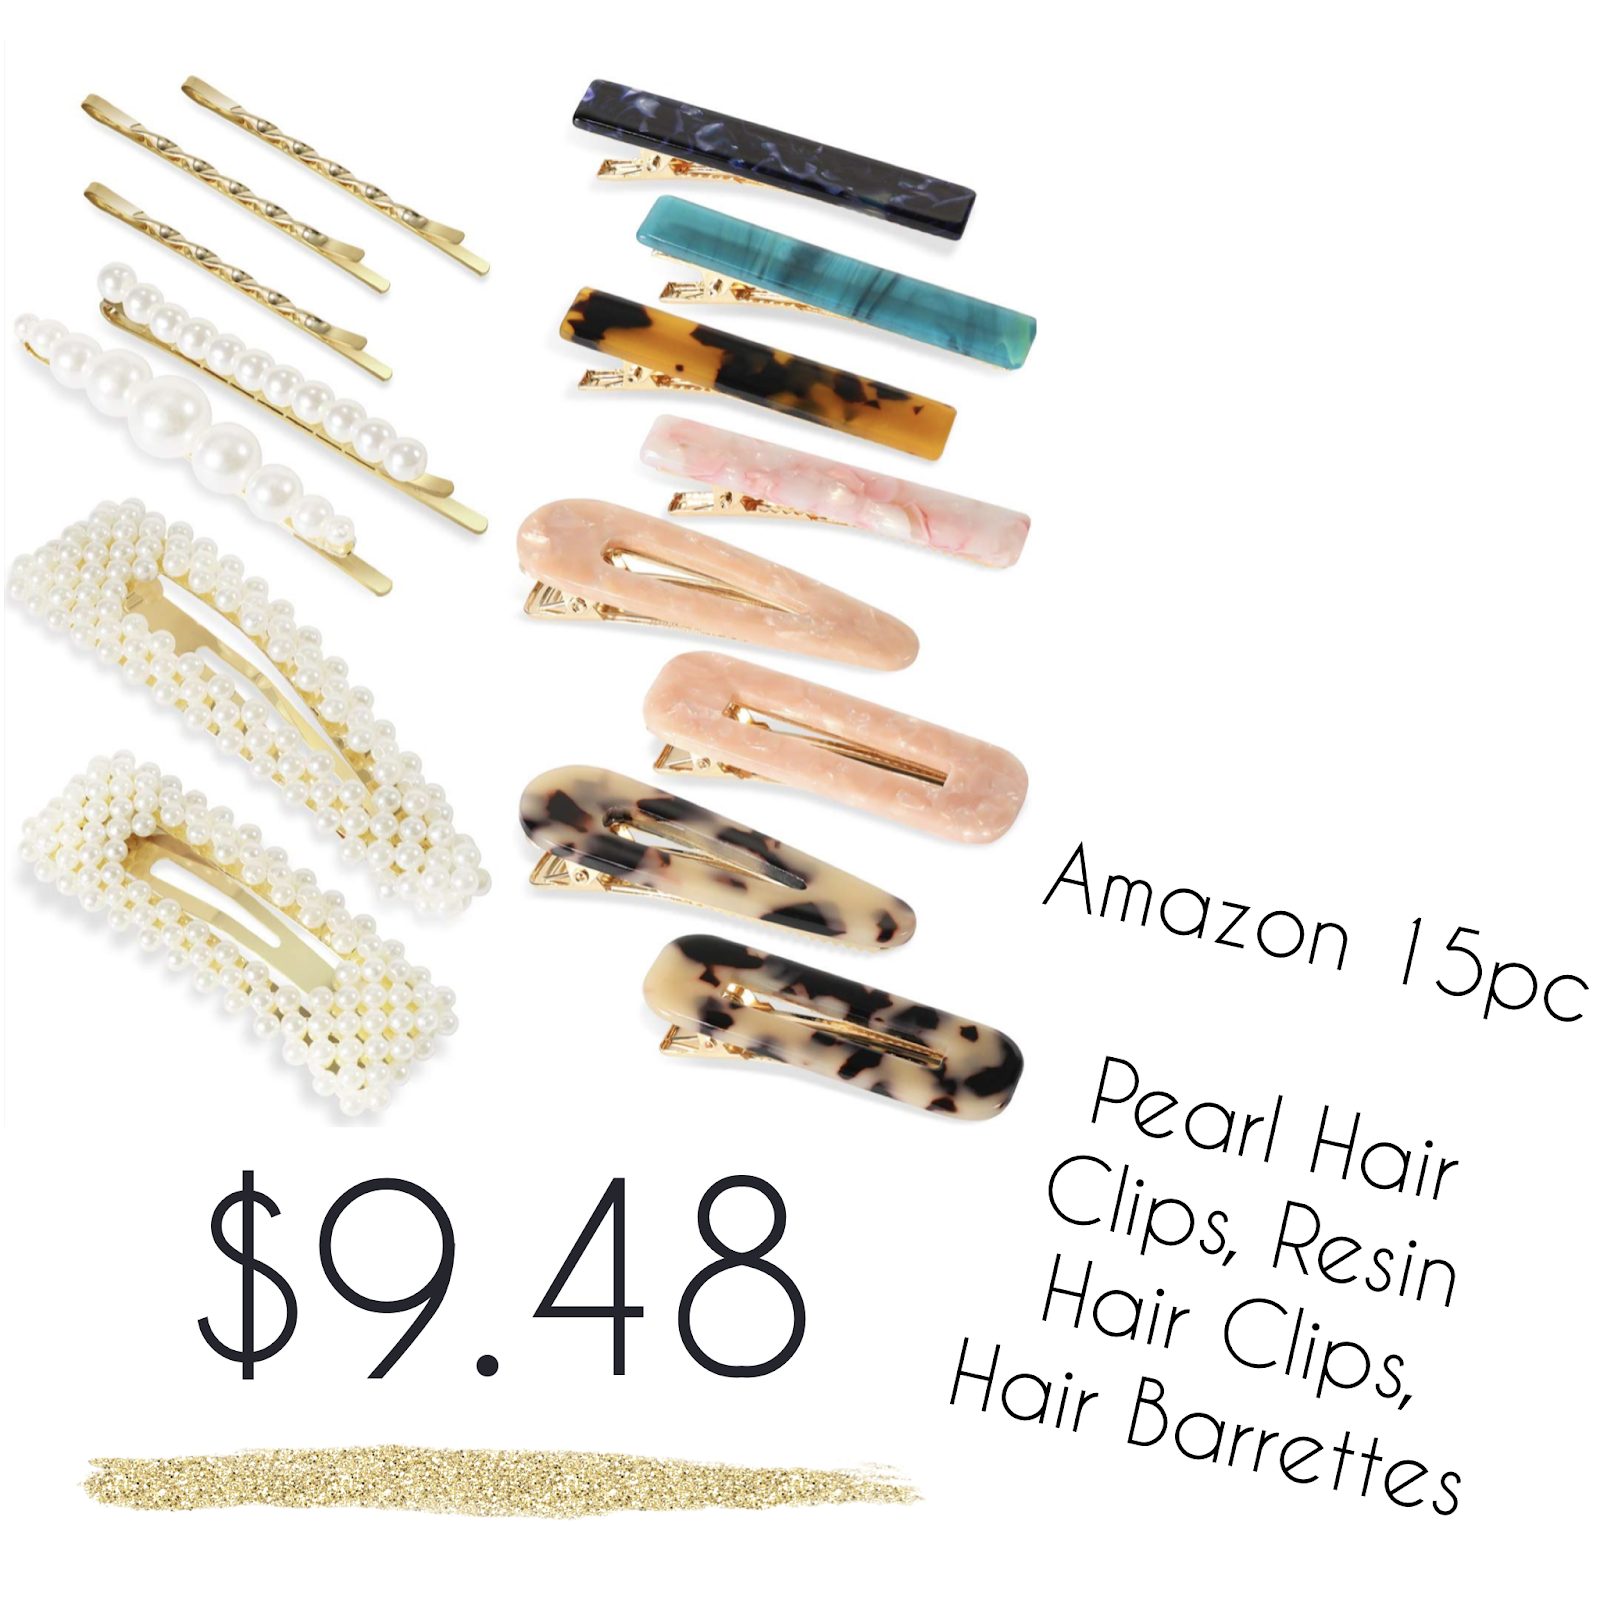 Amazon Hair Clips for Women Girls - 15 Assorted Hair Pearl Barrettes Including 10 Acrylic Hair Clip and 5 Pearl Hair Clips | Stocking Stuffers Gift Ideas Under $50 | Affordable by Amanda, Tampa Blogger